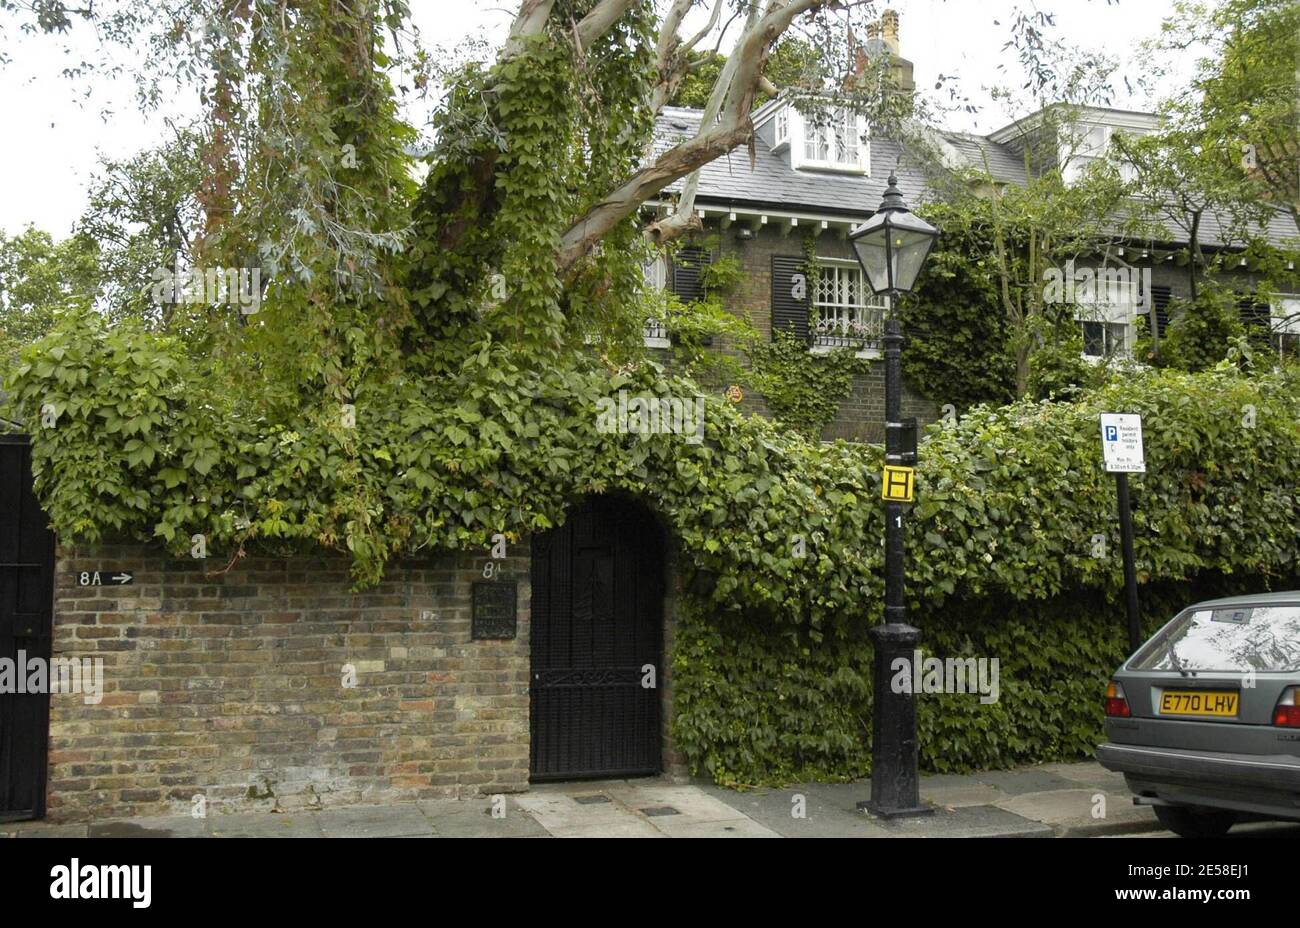 This is Kate Moss' London home, currently on market for $6.7 million, that she once shared with Babyshambles singer Pete Doherty. The model moved out of the home, after